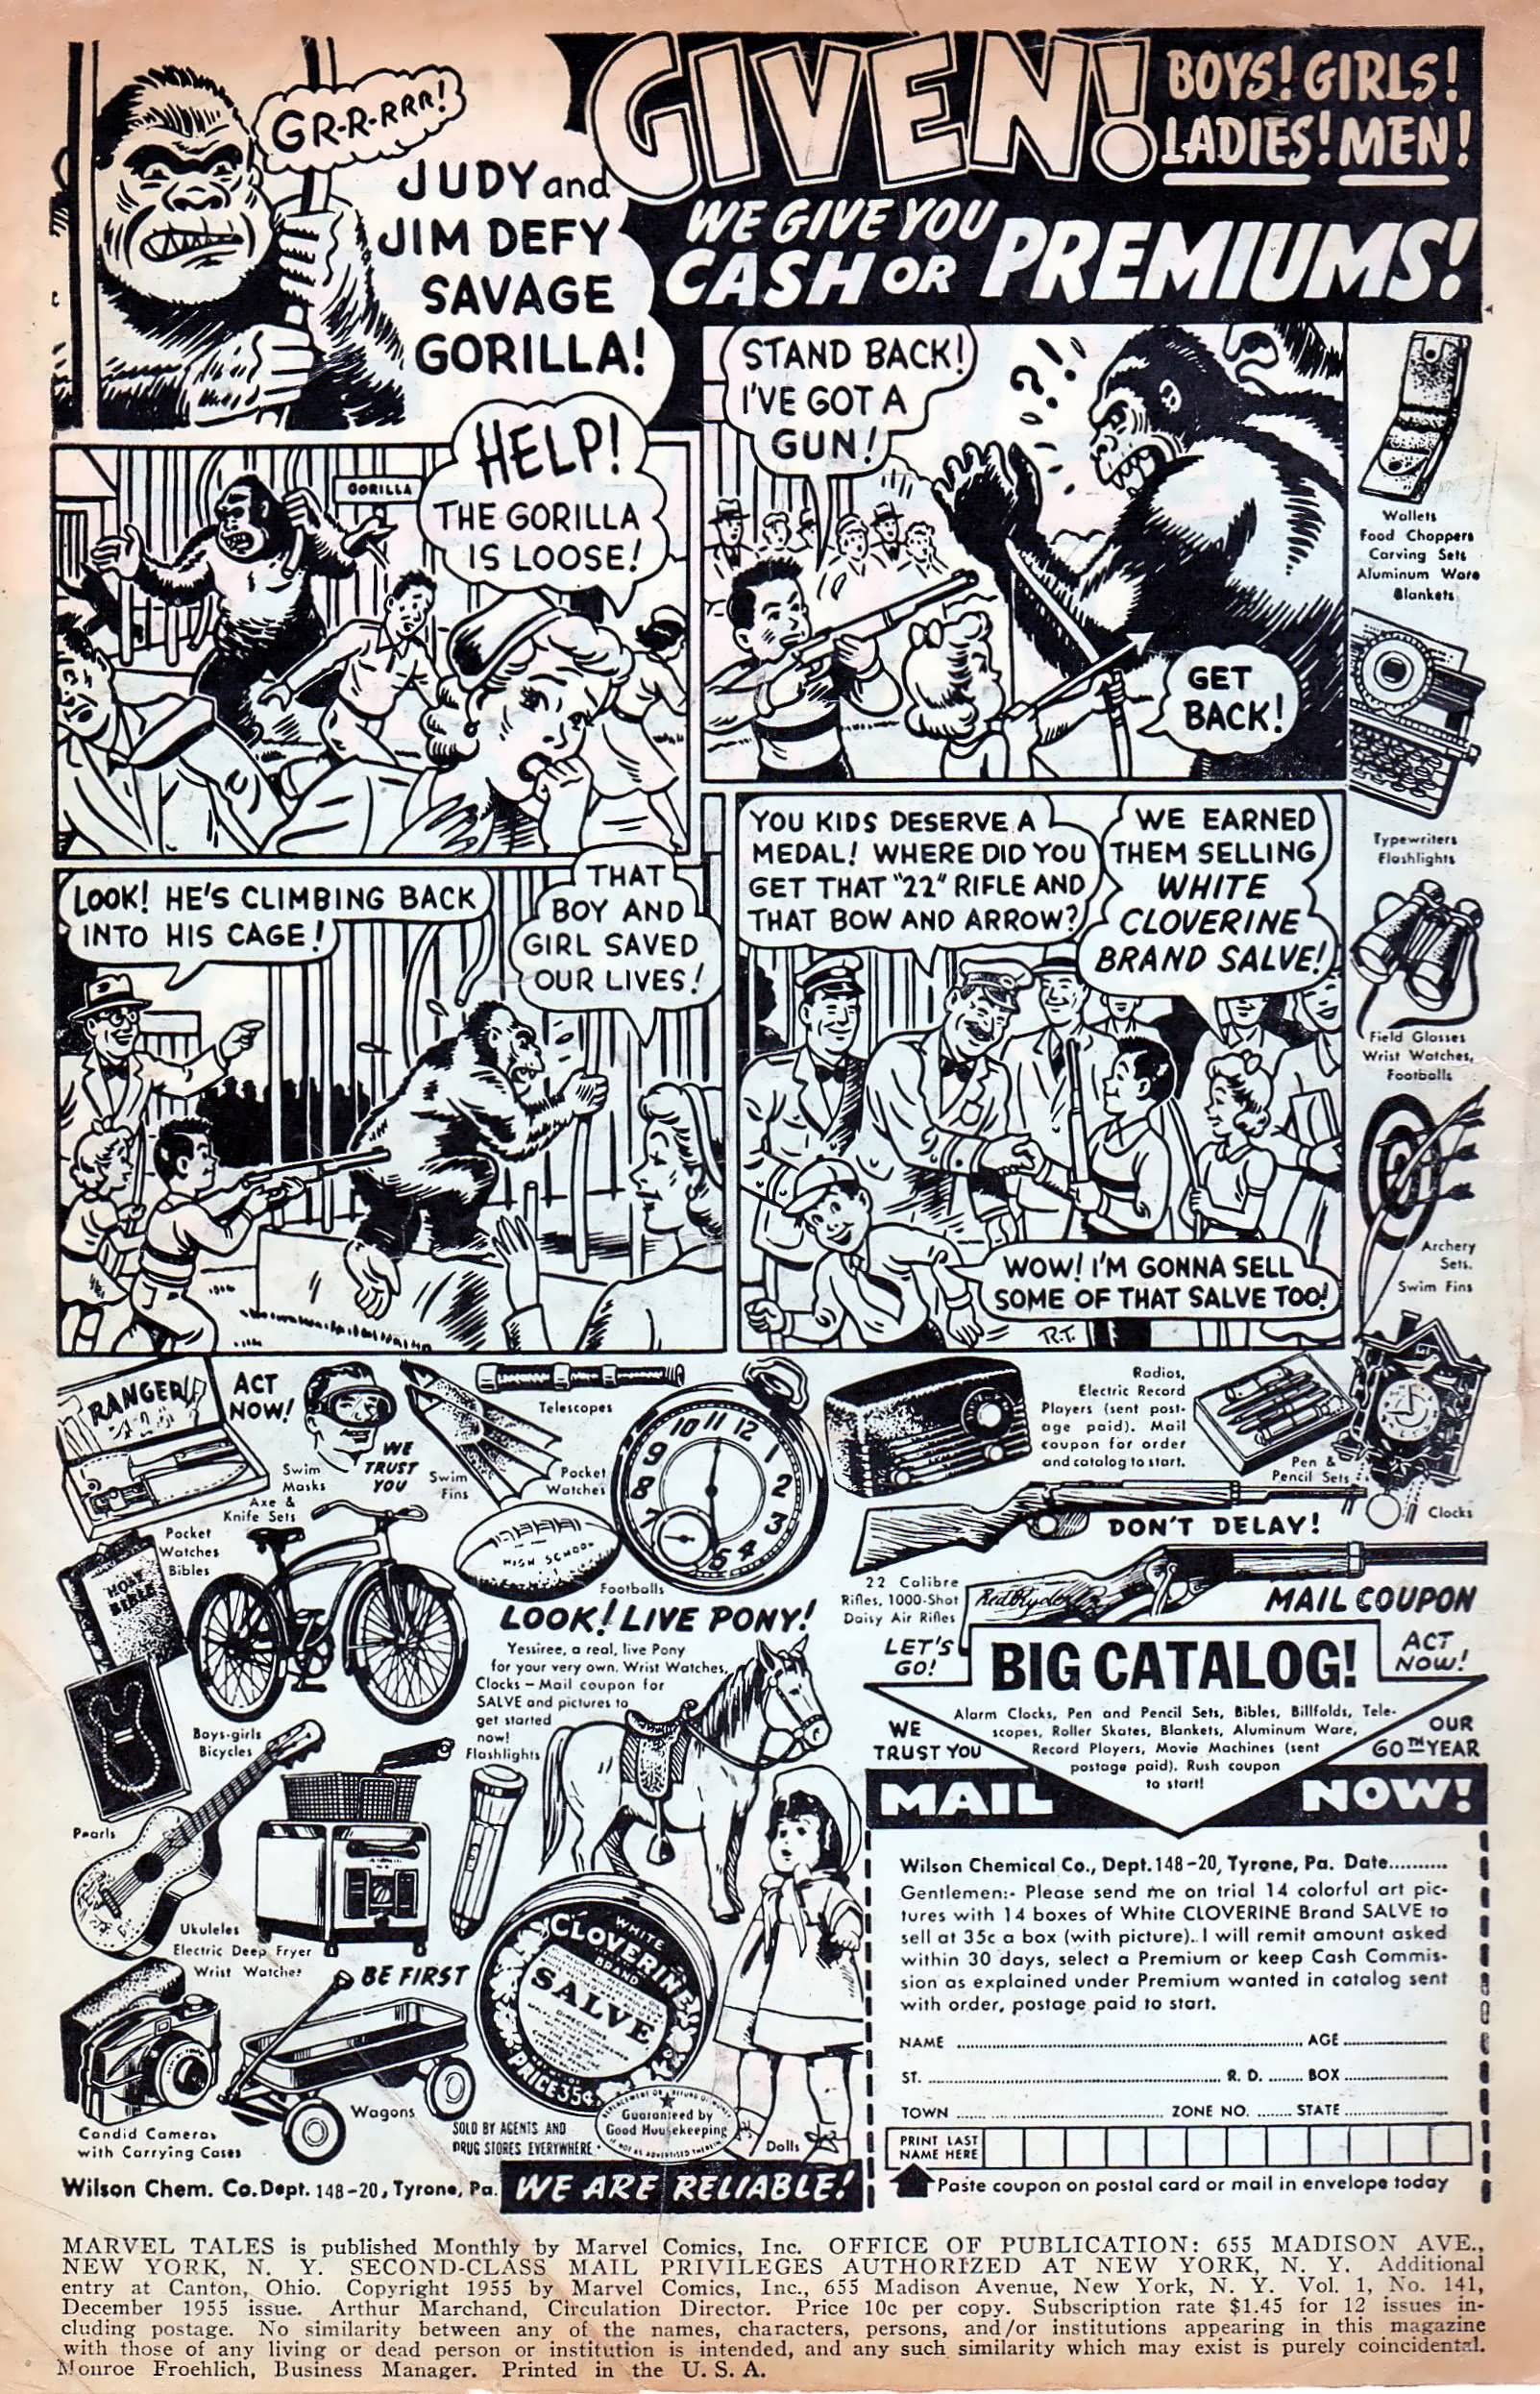 Marvel Tales (1949) 141 Page 1